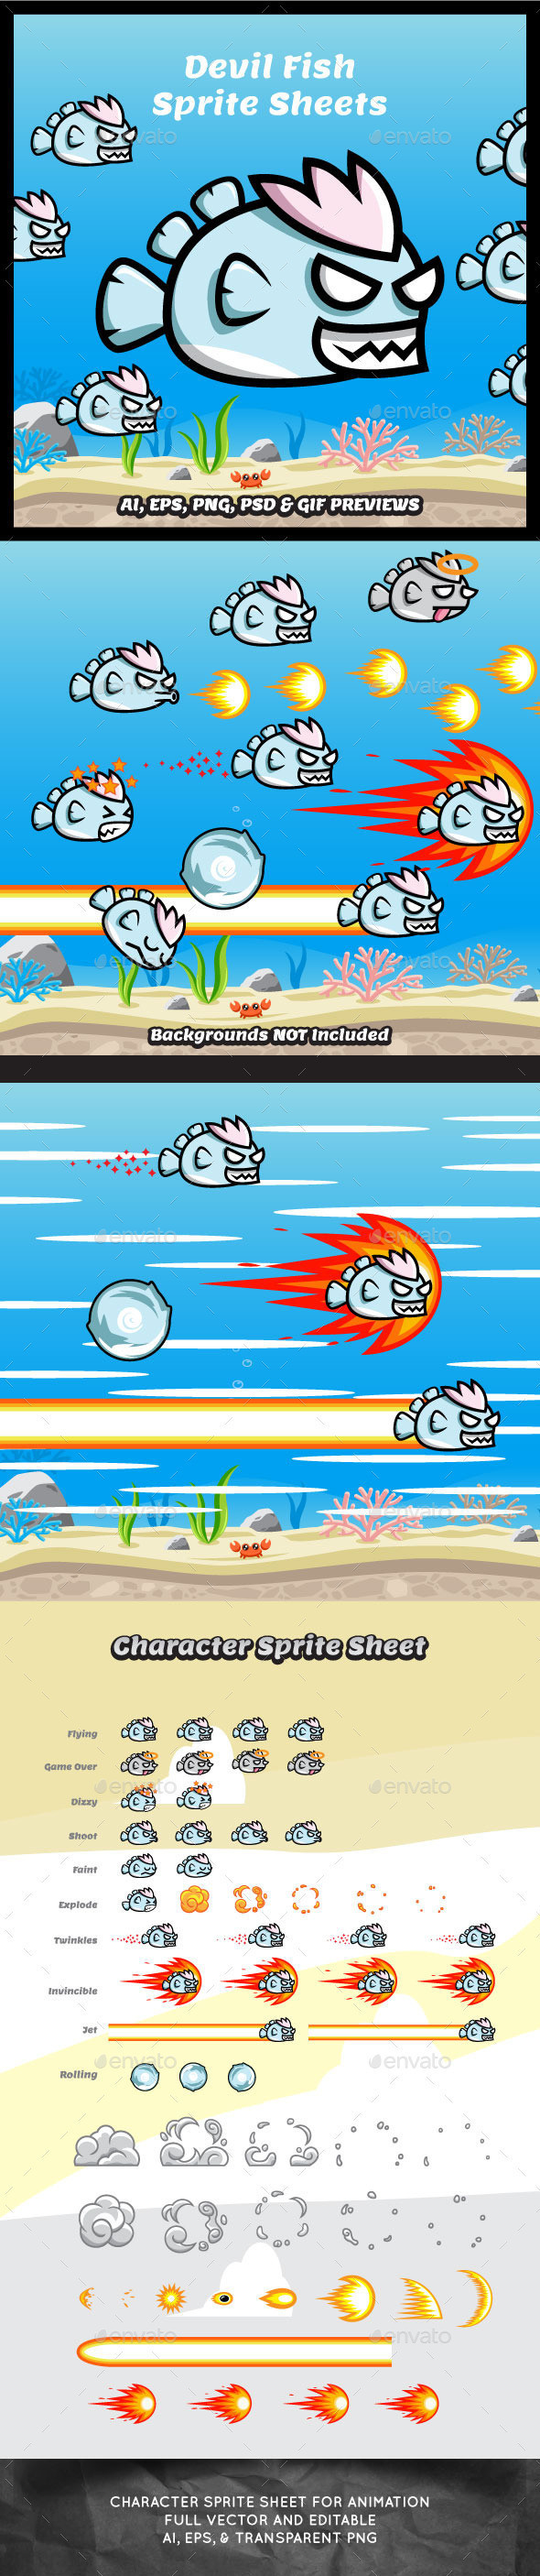 Devil sea fish game character sprite sheet sidescroller game asset flying flappy animation gui mobile games gameart game art 590